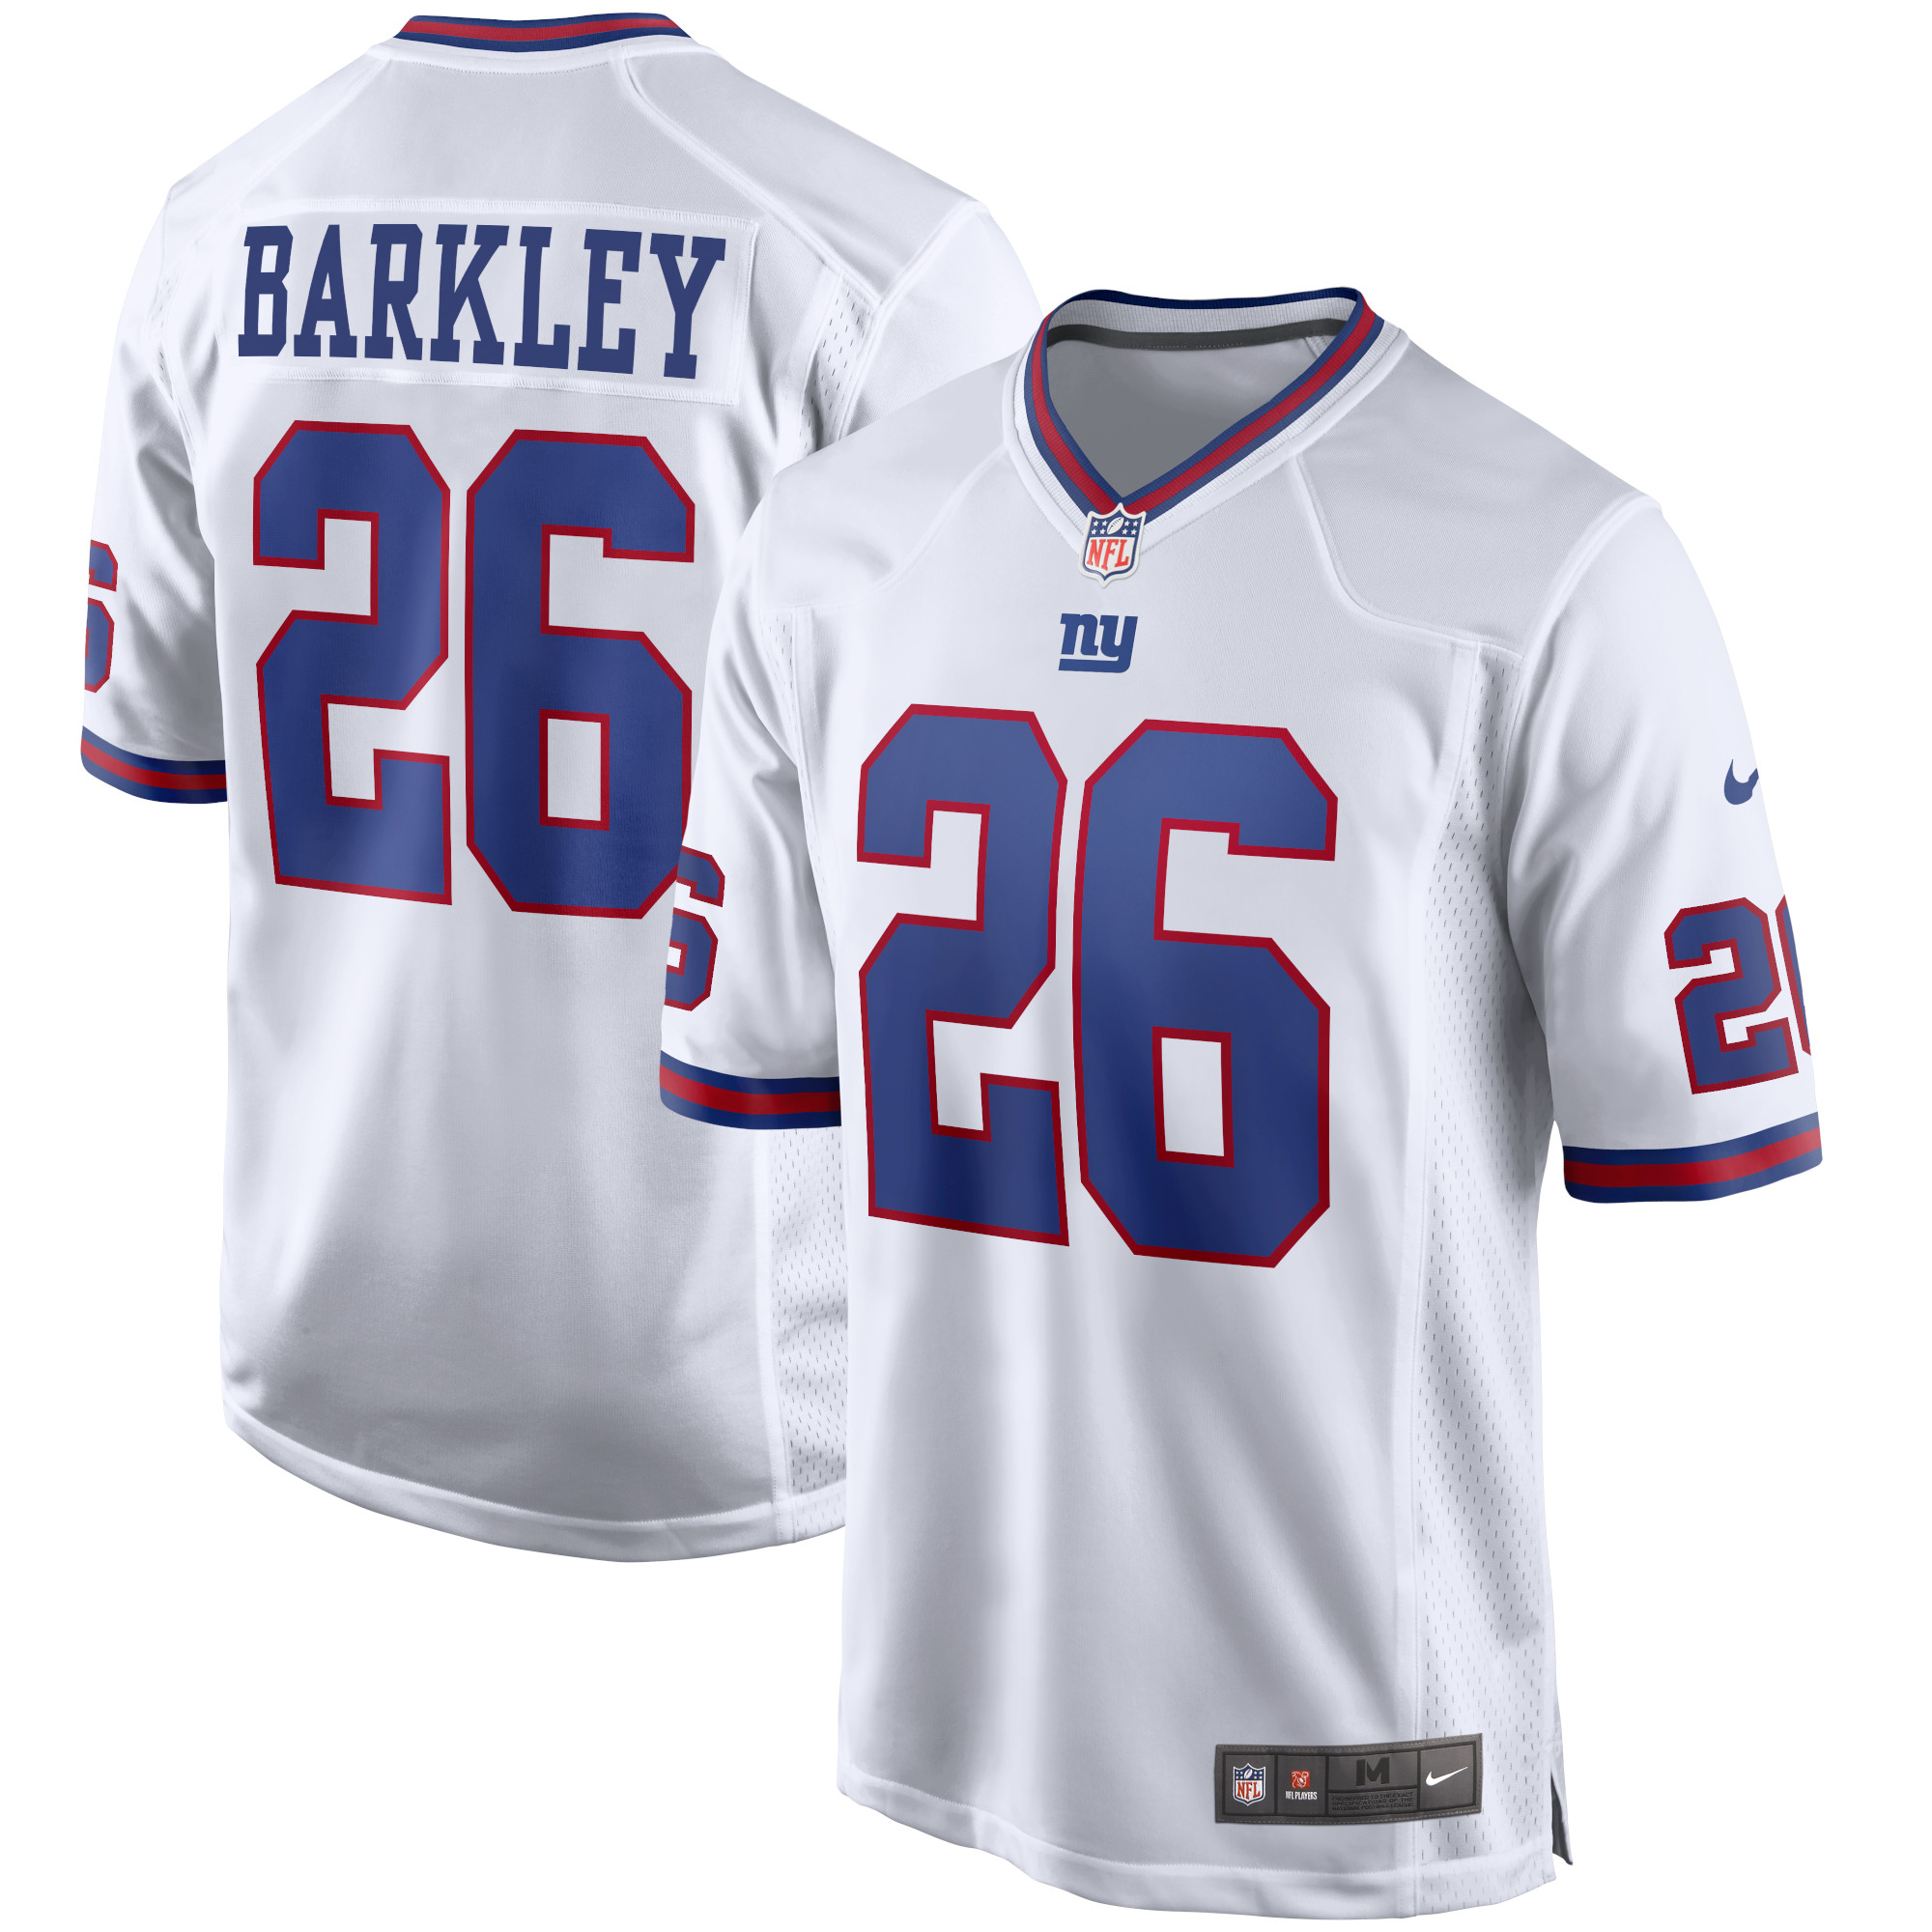 New York Giants Jersey Numbers